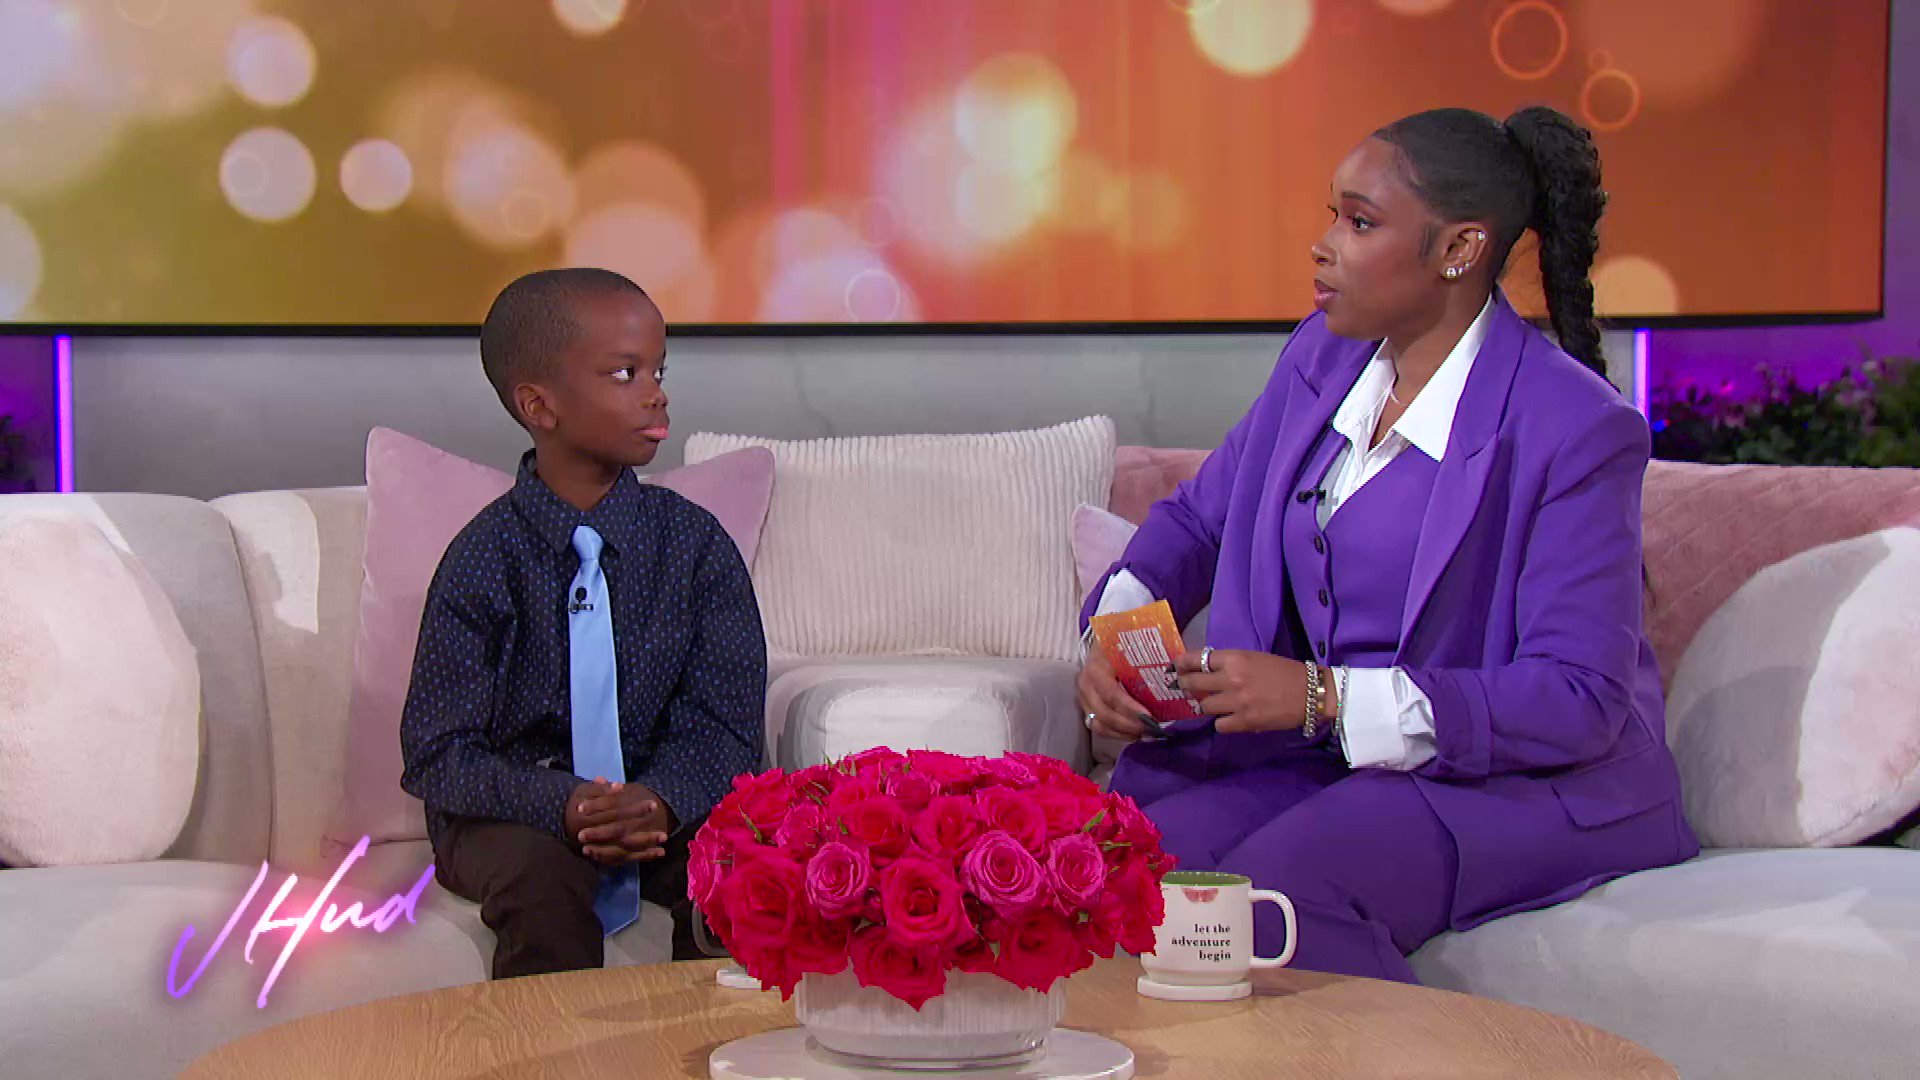 The Jennifer Hudson Show on X: Jeremiah Fennell touched all our hearts  today 💜🙏 Jeremiah, we can't wait to watch you continue to soar! Come back  and see us real soon, okay?